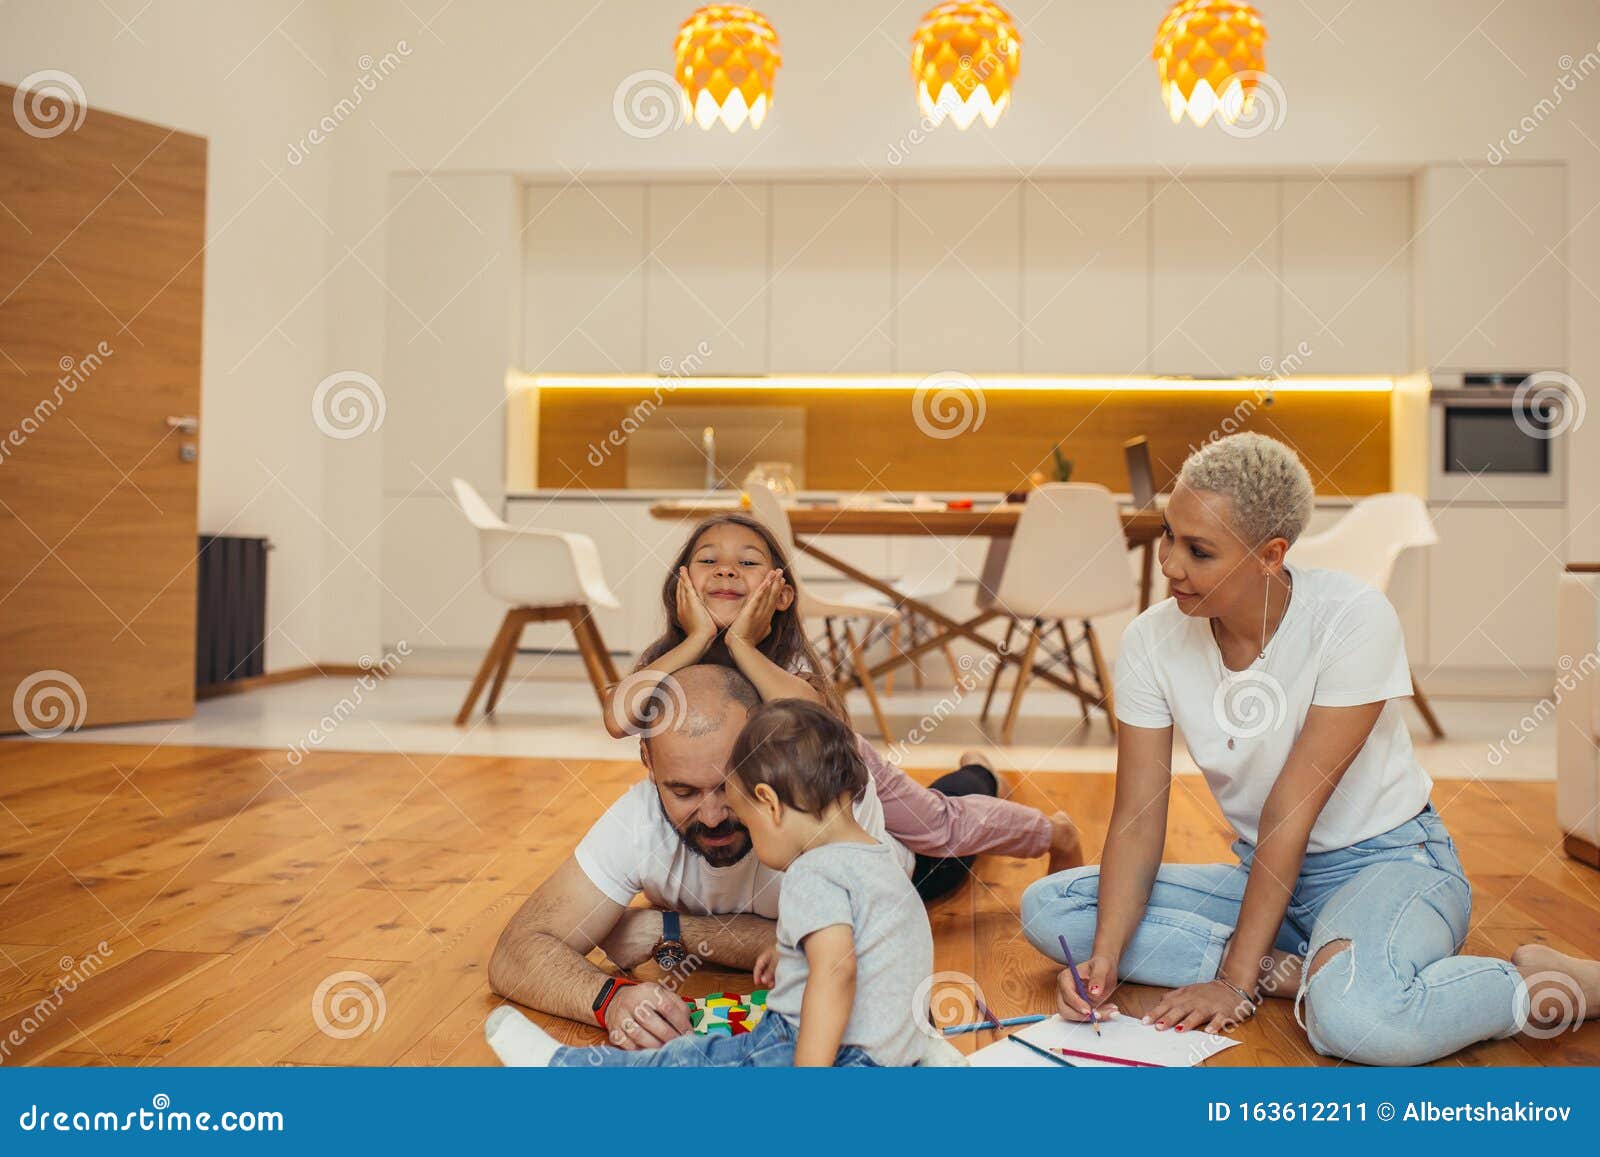 Caucasian Family Parents With Children Playing And Laughing On